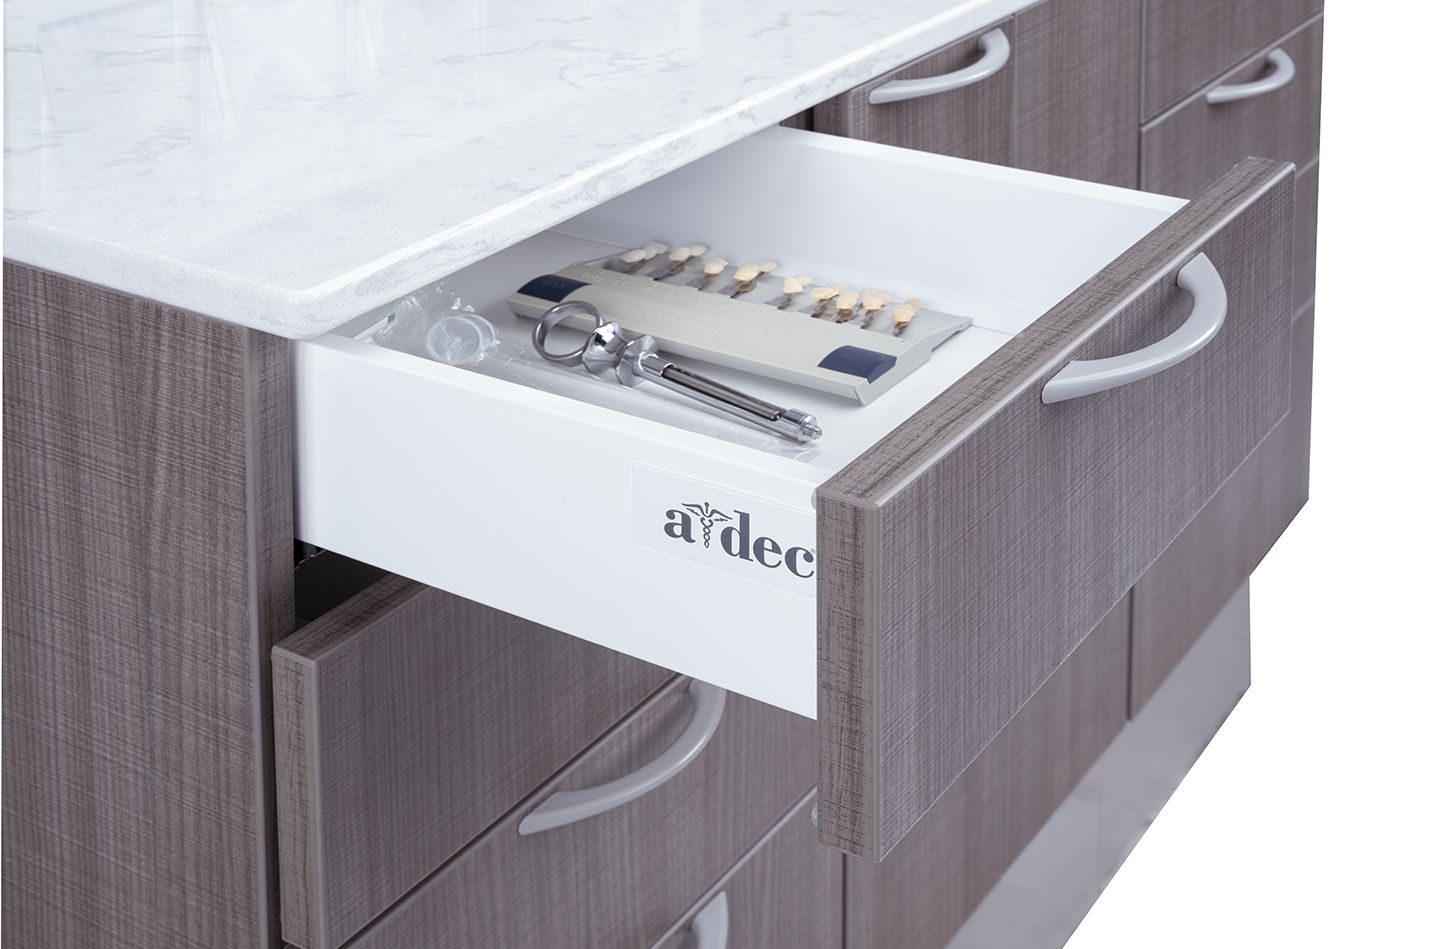 A-dec Inspire 391 hygiene console pull-out drawer